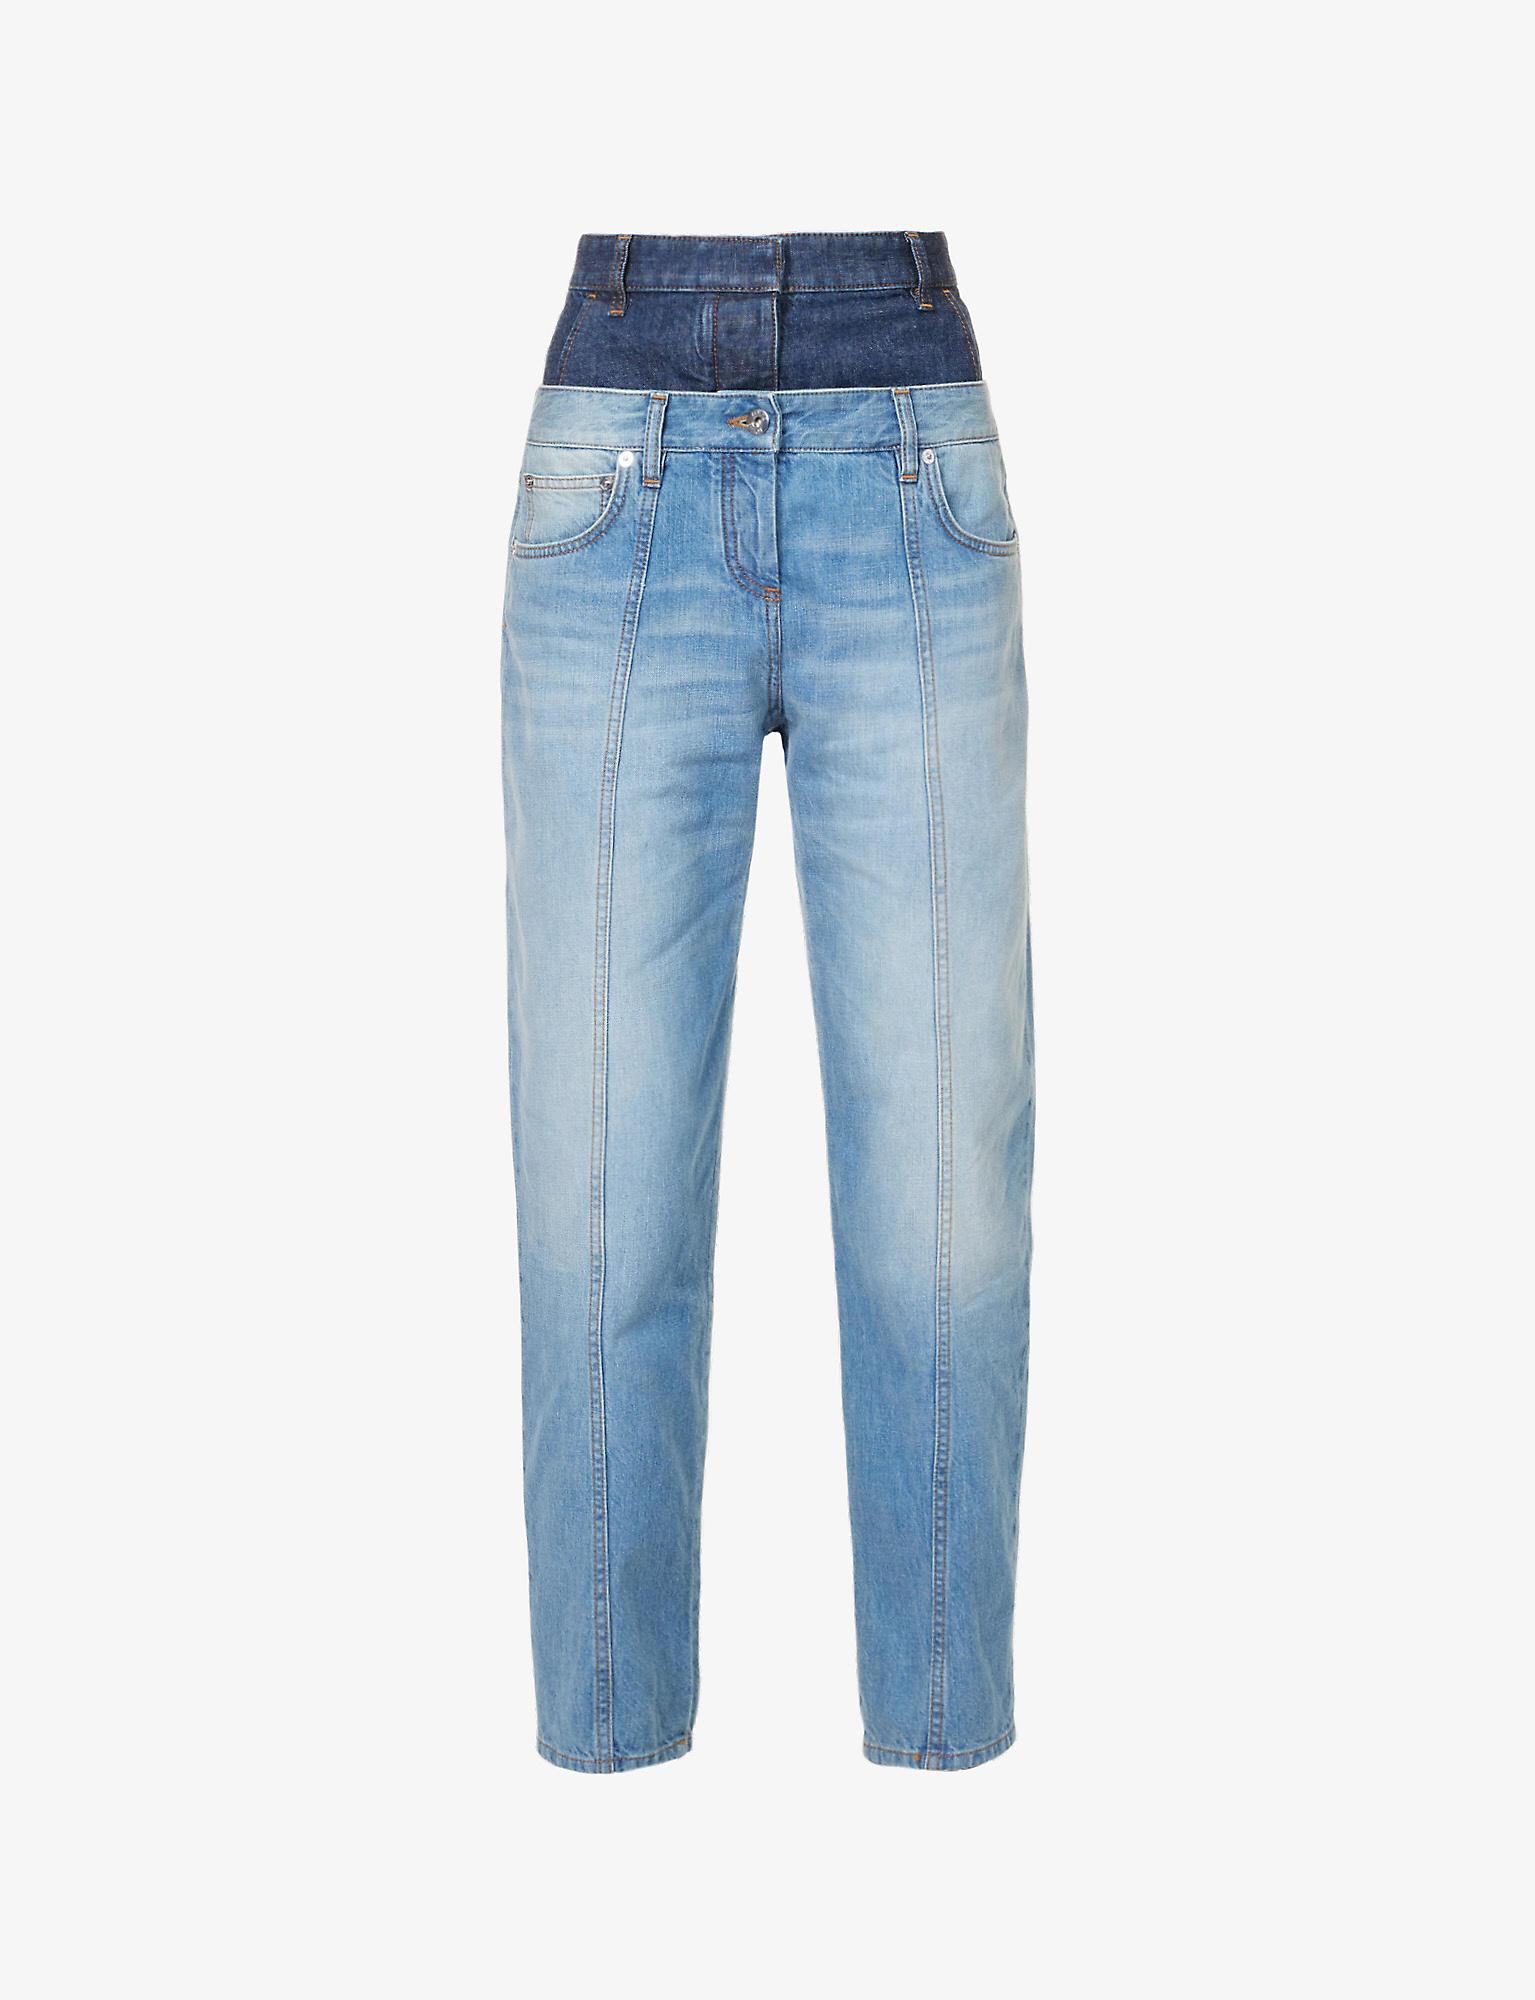 Loewe Trompe L'oeil Double-waistband Tapered High-rise Denim Jeans in ...